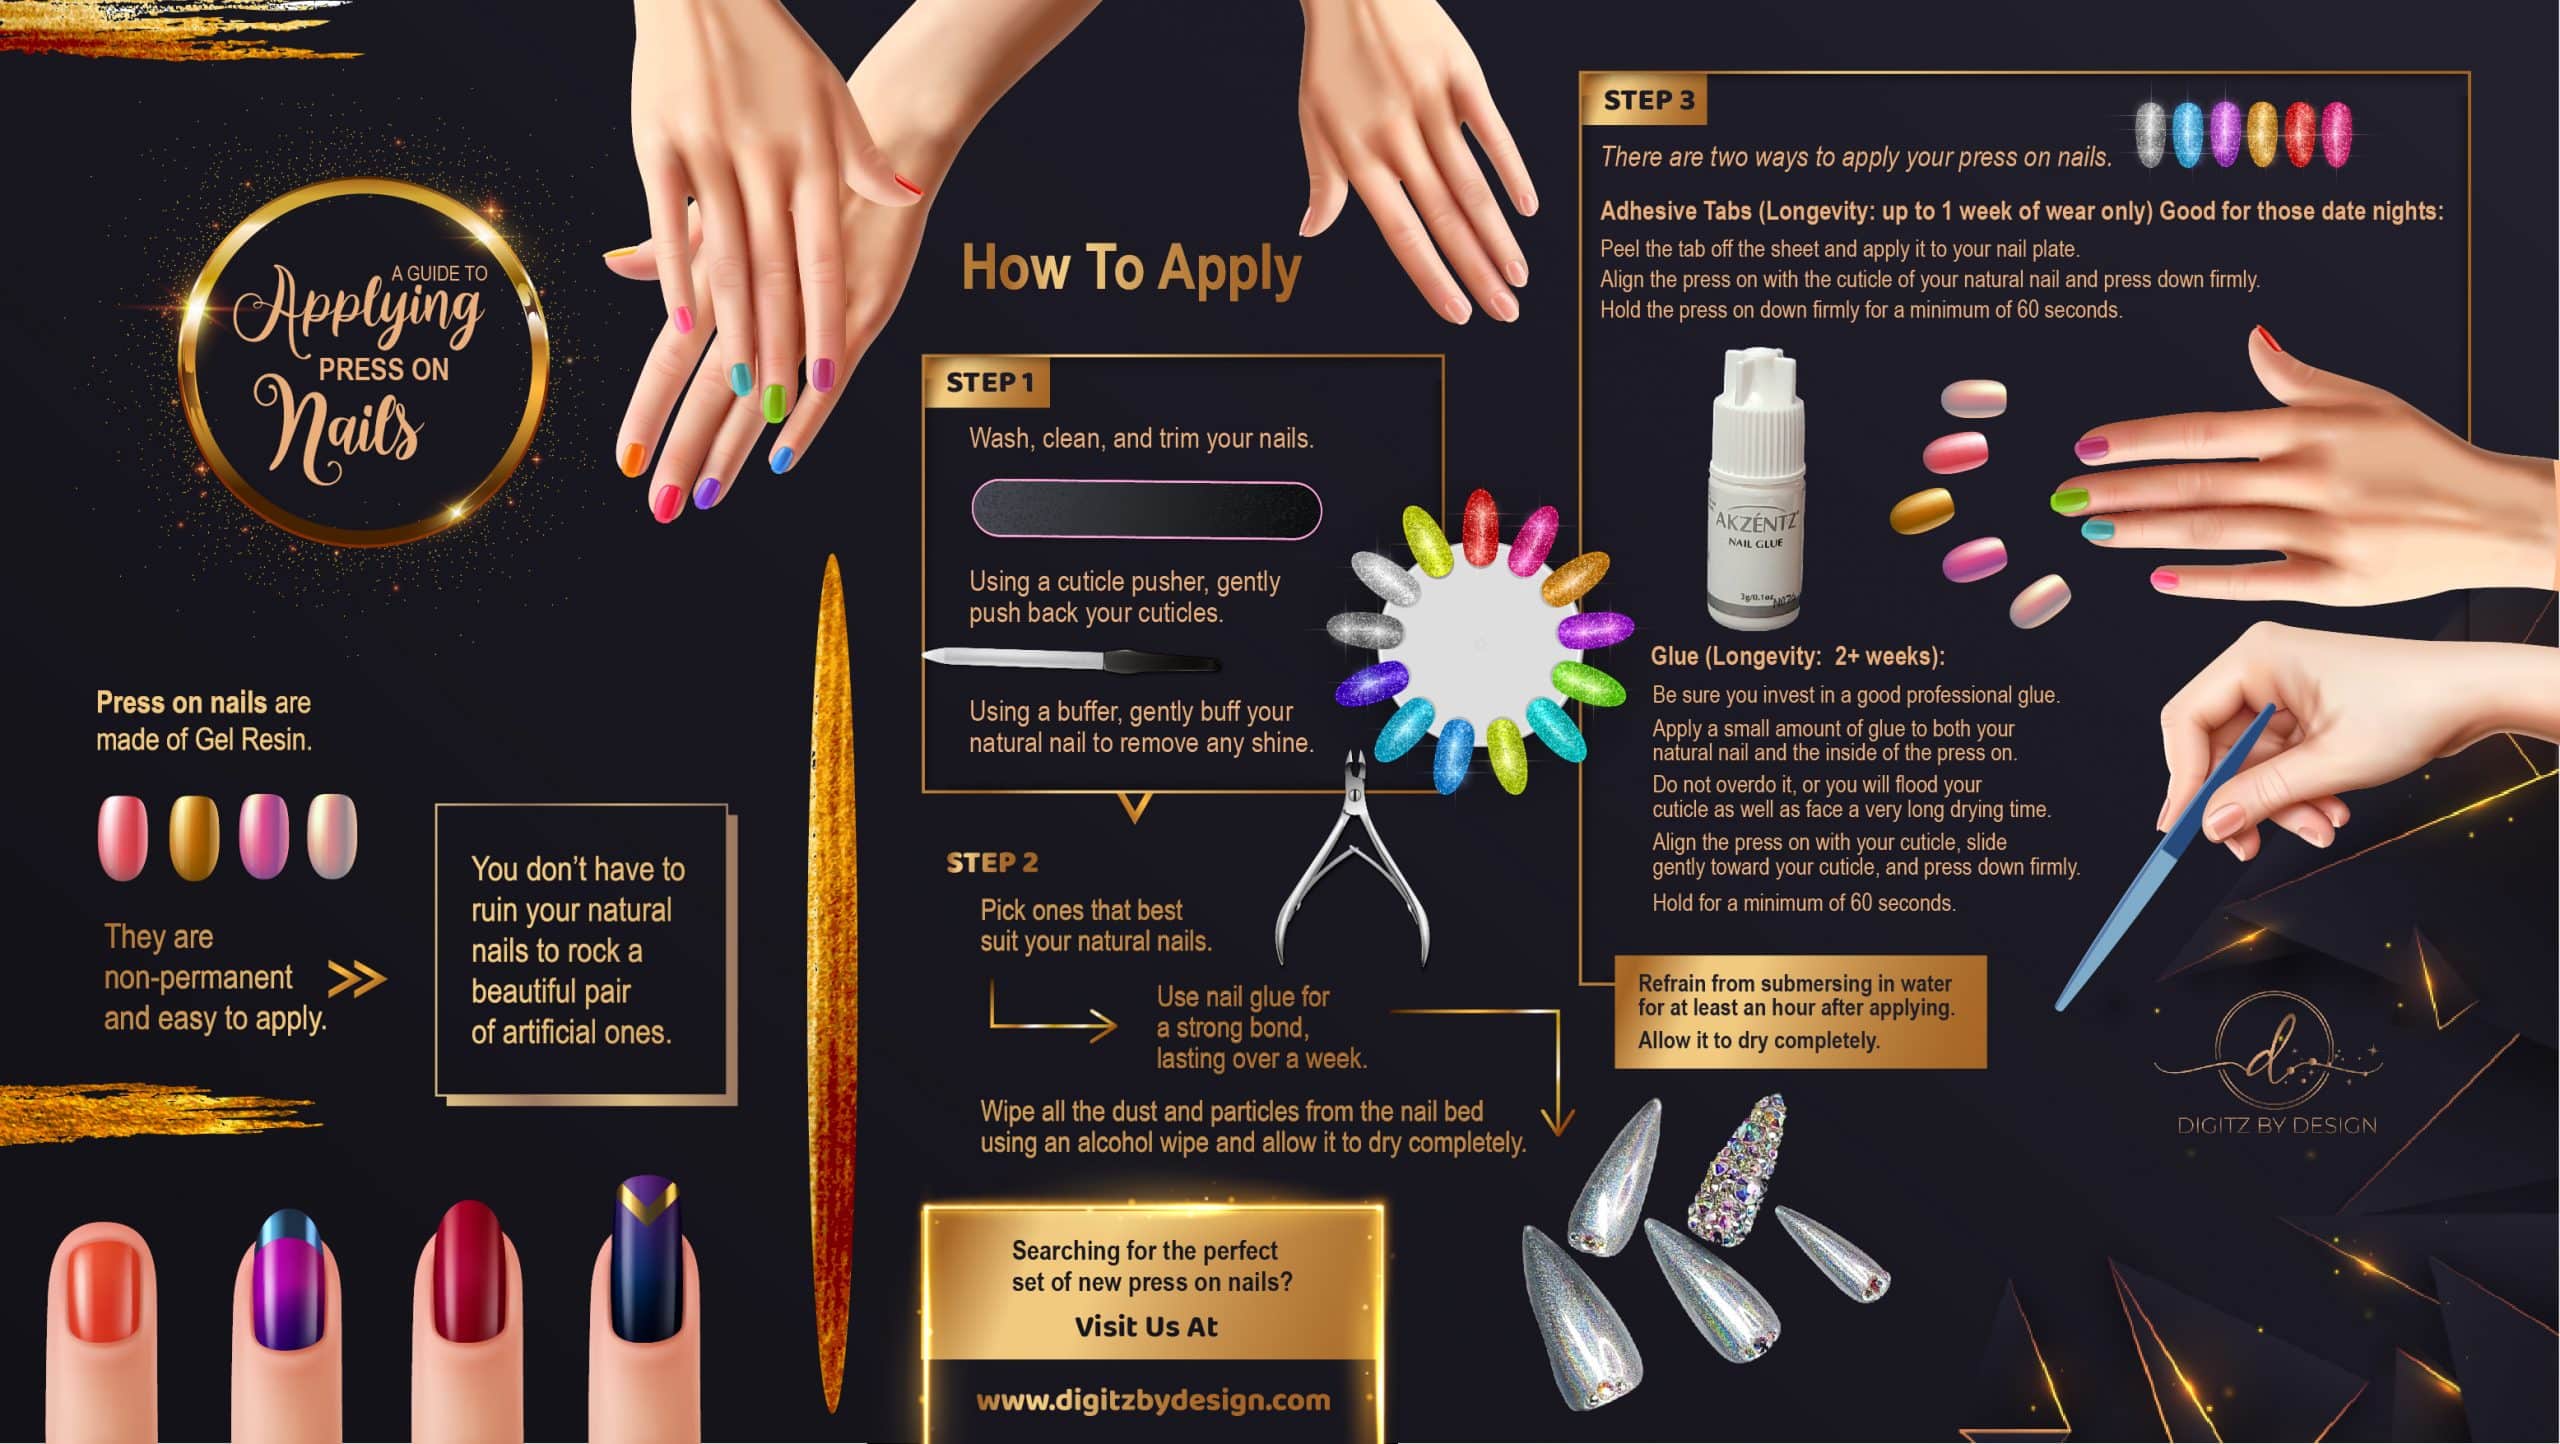 A Guide to Applying Press on nails